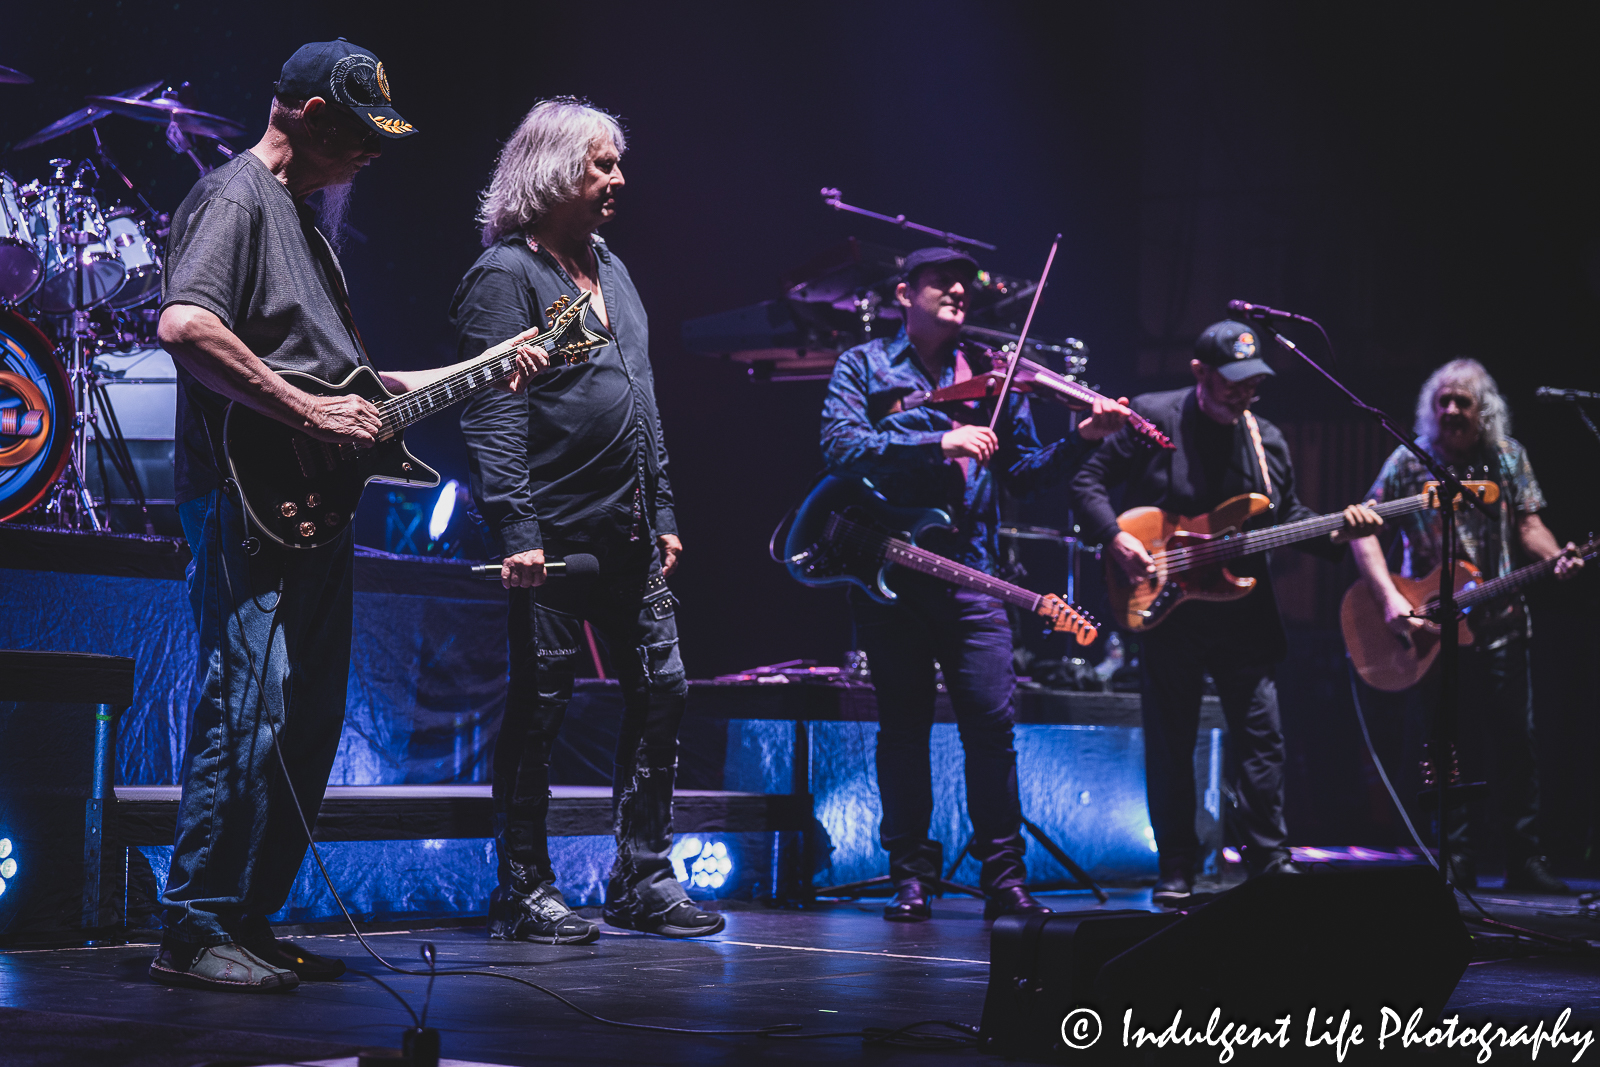 Kansas founding members Kerry Livgren and Dave Hope making special guest appearances during the band's performance at Midland Theatre in downtown Kansas City, MO on July 27, 2023.